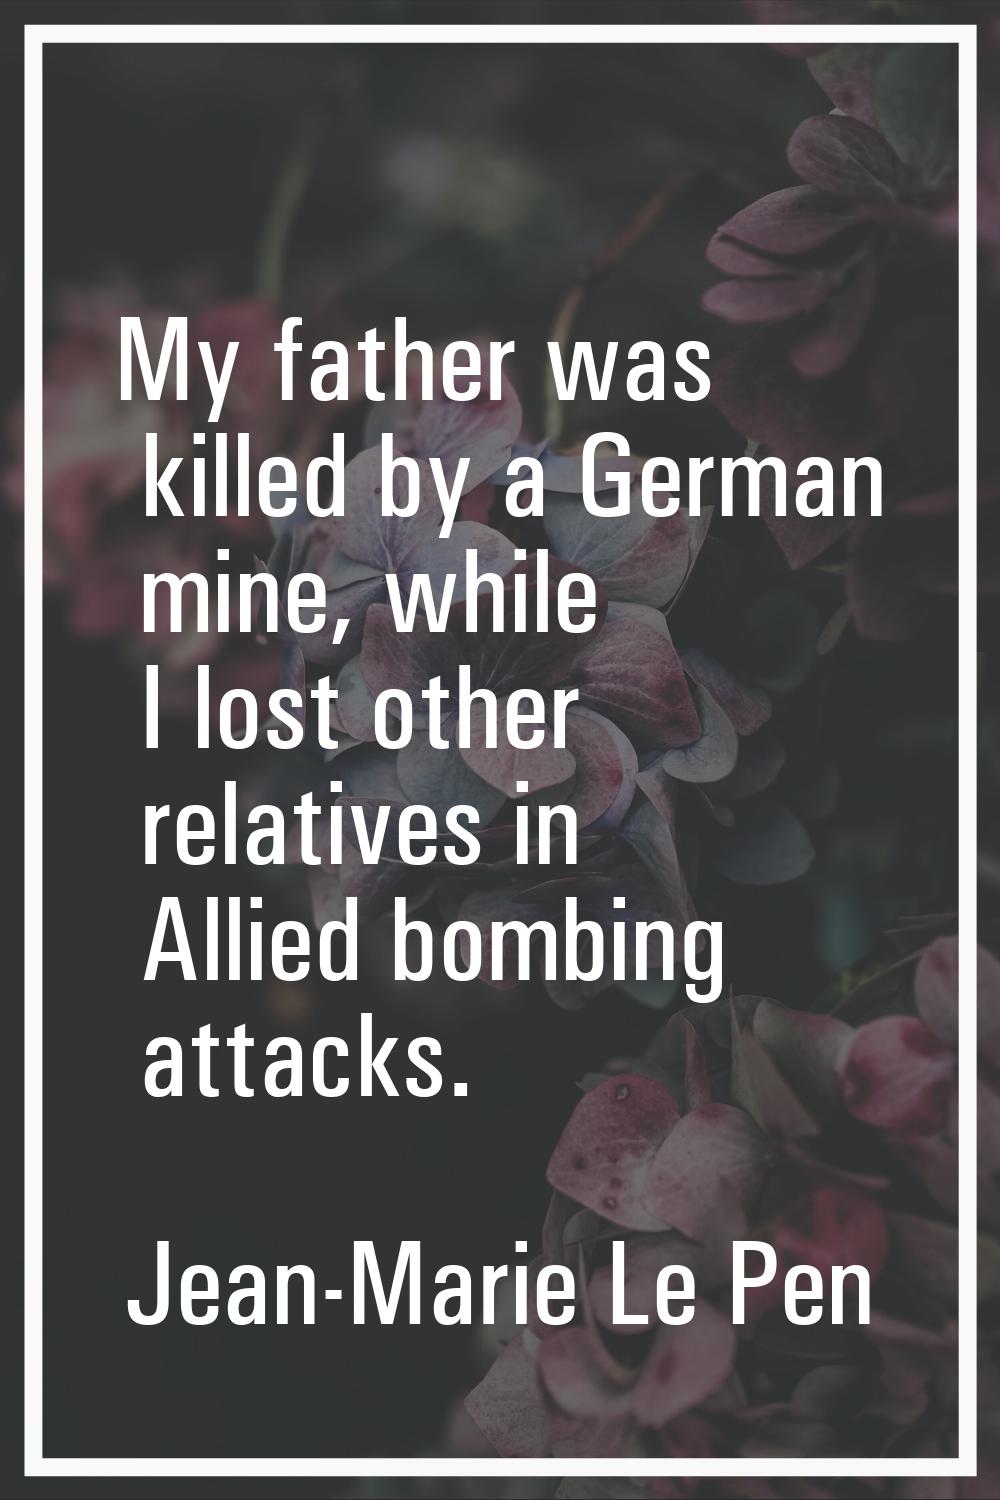 My father was killed by a German mine, while I lost other relatives in Allied bombing attacks.